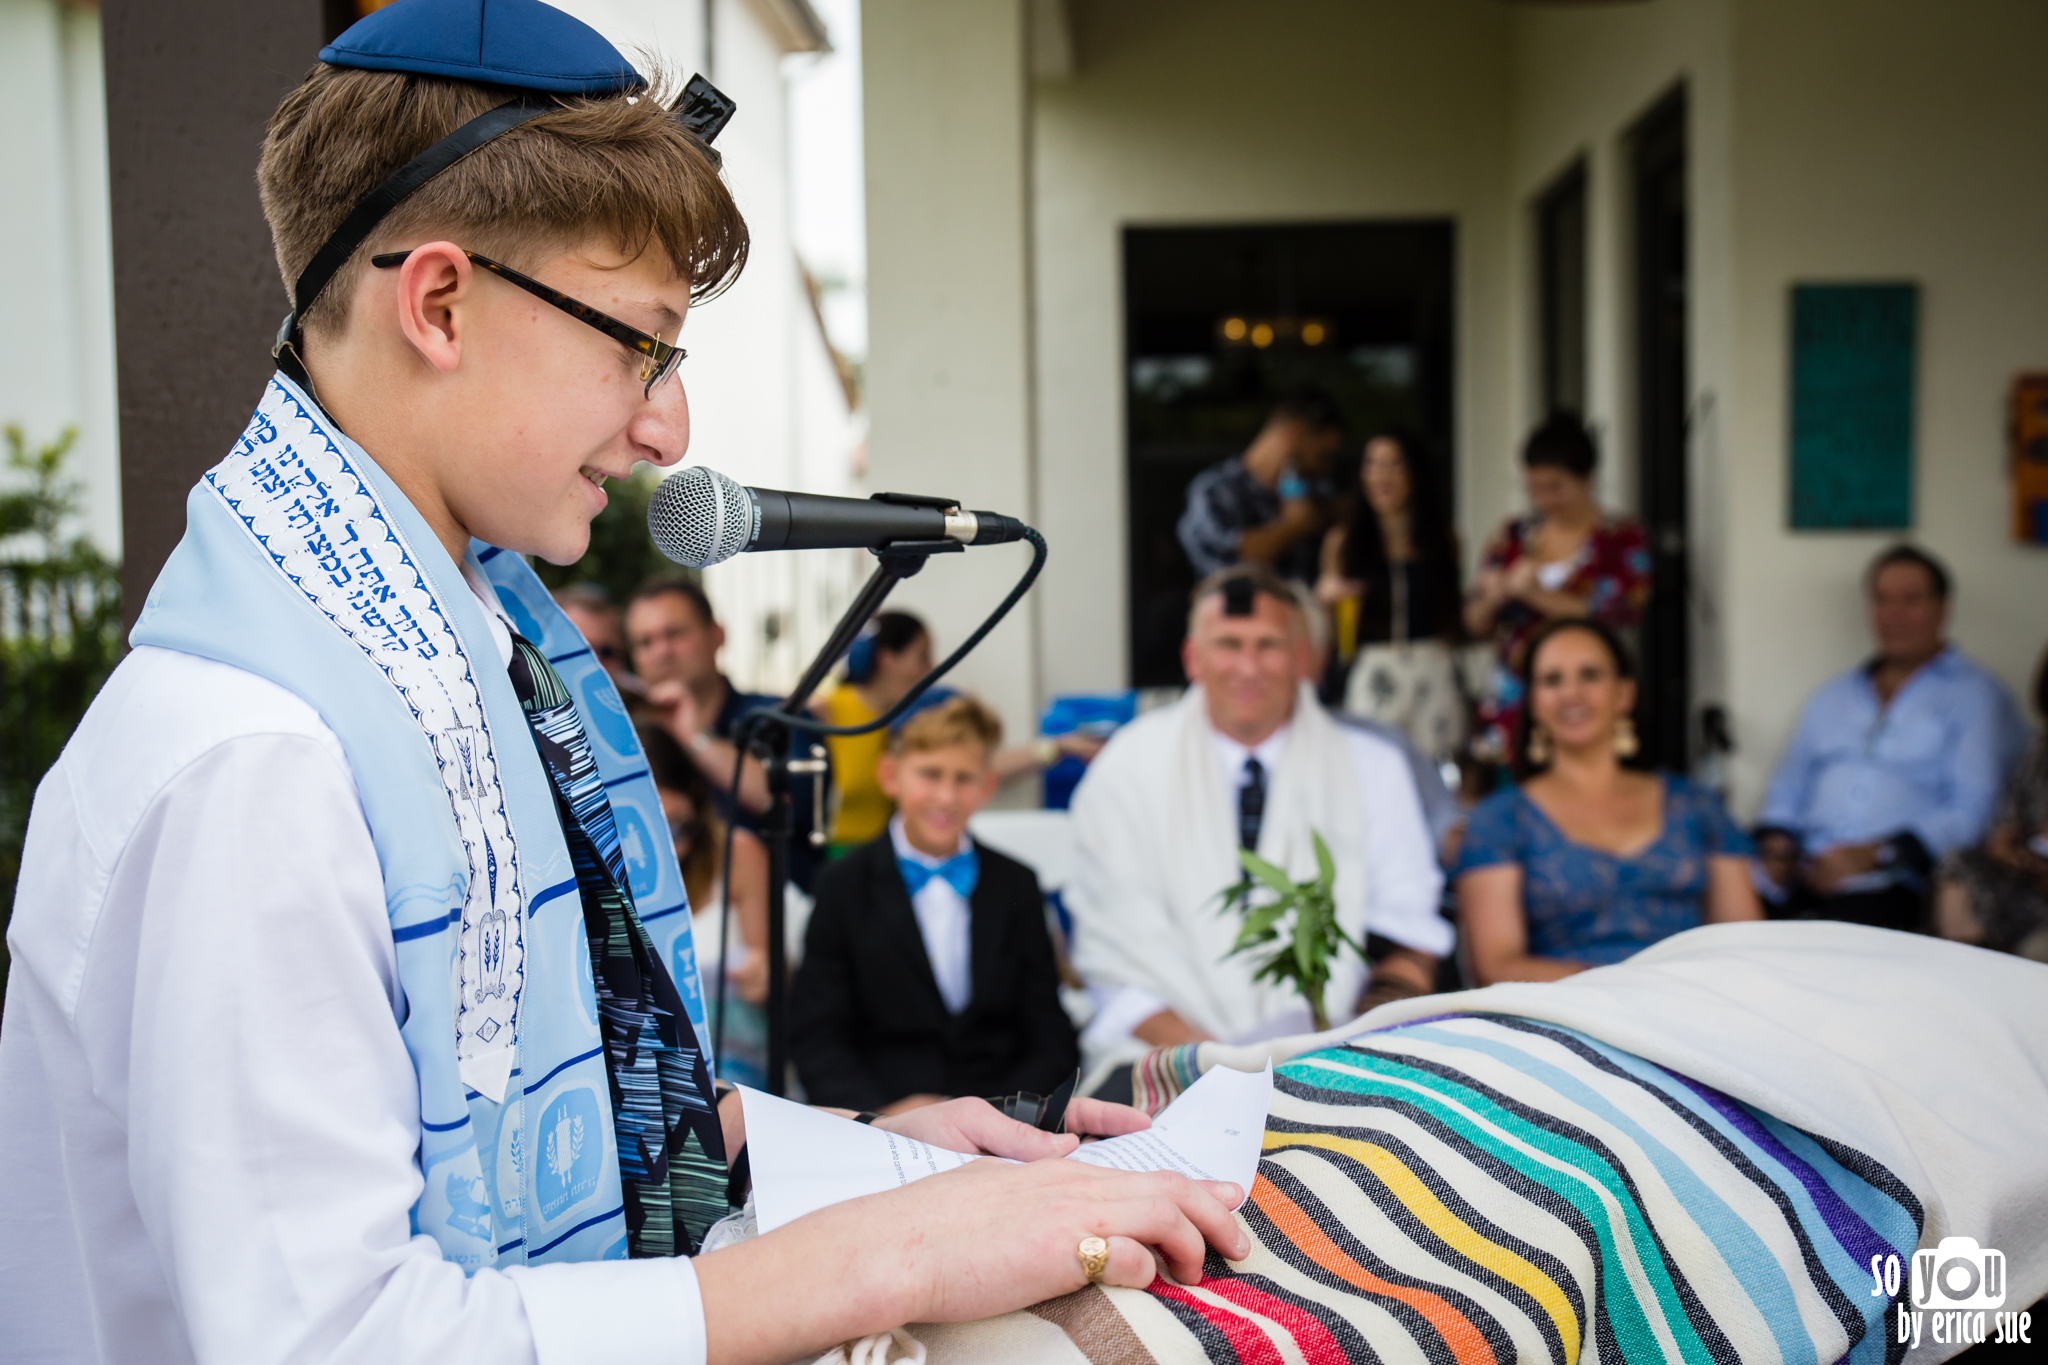 bar-mitzvah-photography-ft-lauderdale-so-you-by-erica-sue-0656.jpg